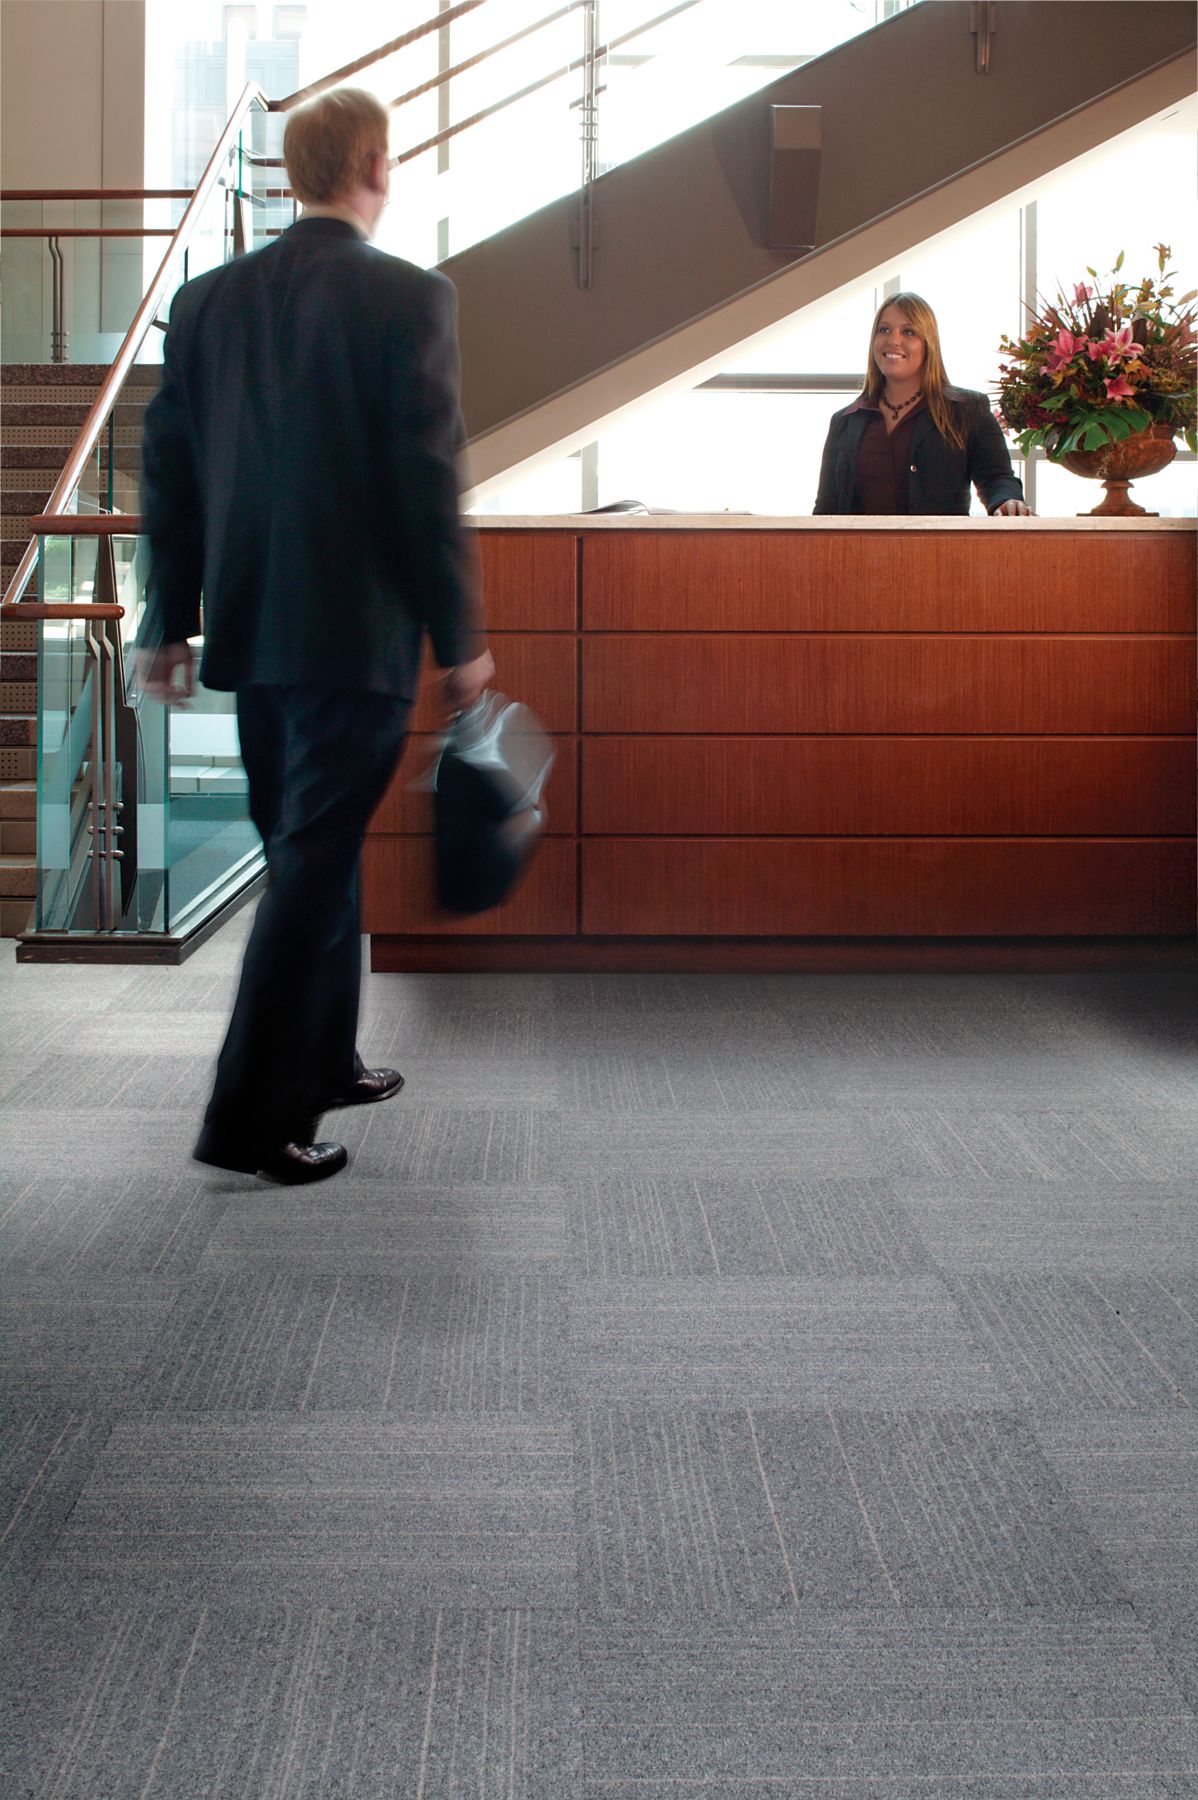 interface Flannel carpet tile in office reception area with man and woman image number 2